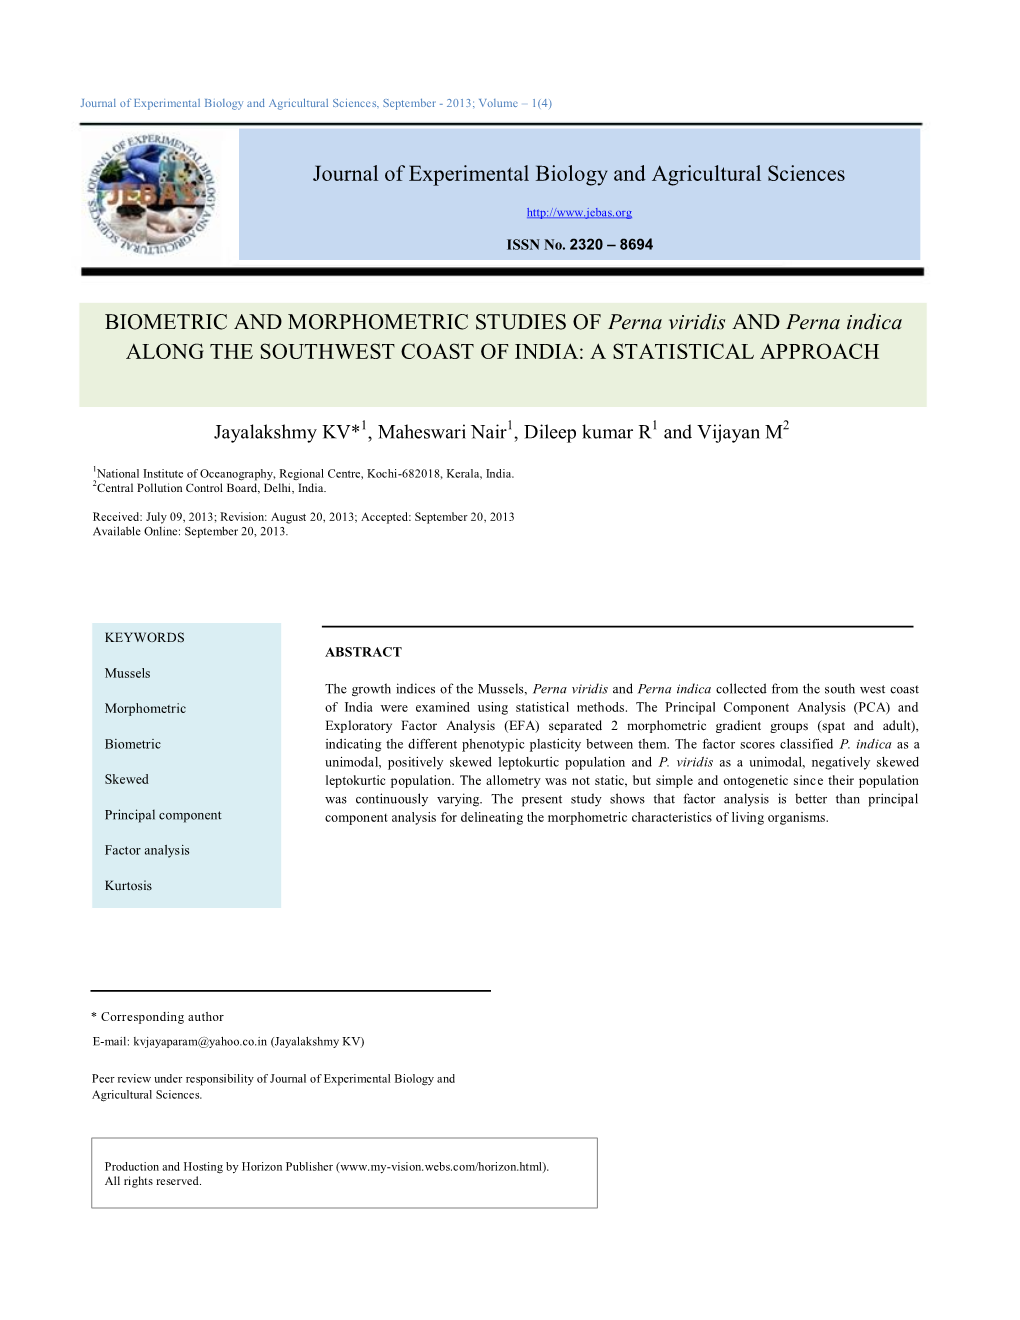 BIOMETRIC and MORPHOMETRIC STUDIES of Perna Viridis and Perna Indica ALONG the SOUTHWEST COAST of INDIA: a STATISTICAL APPROACH